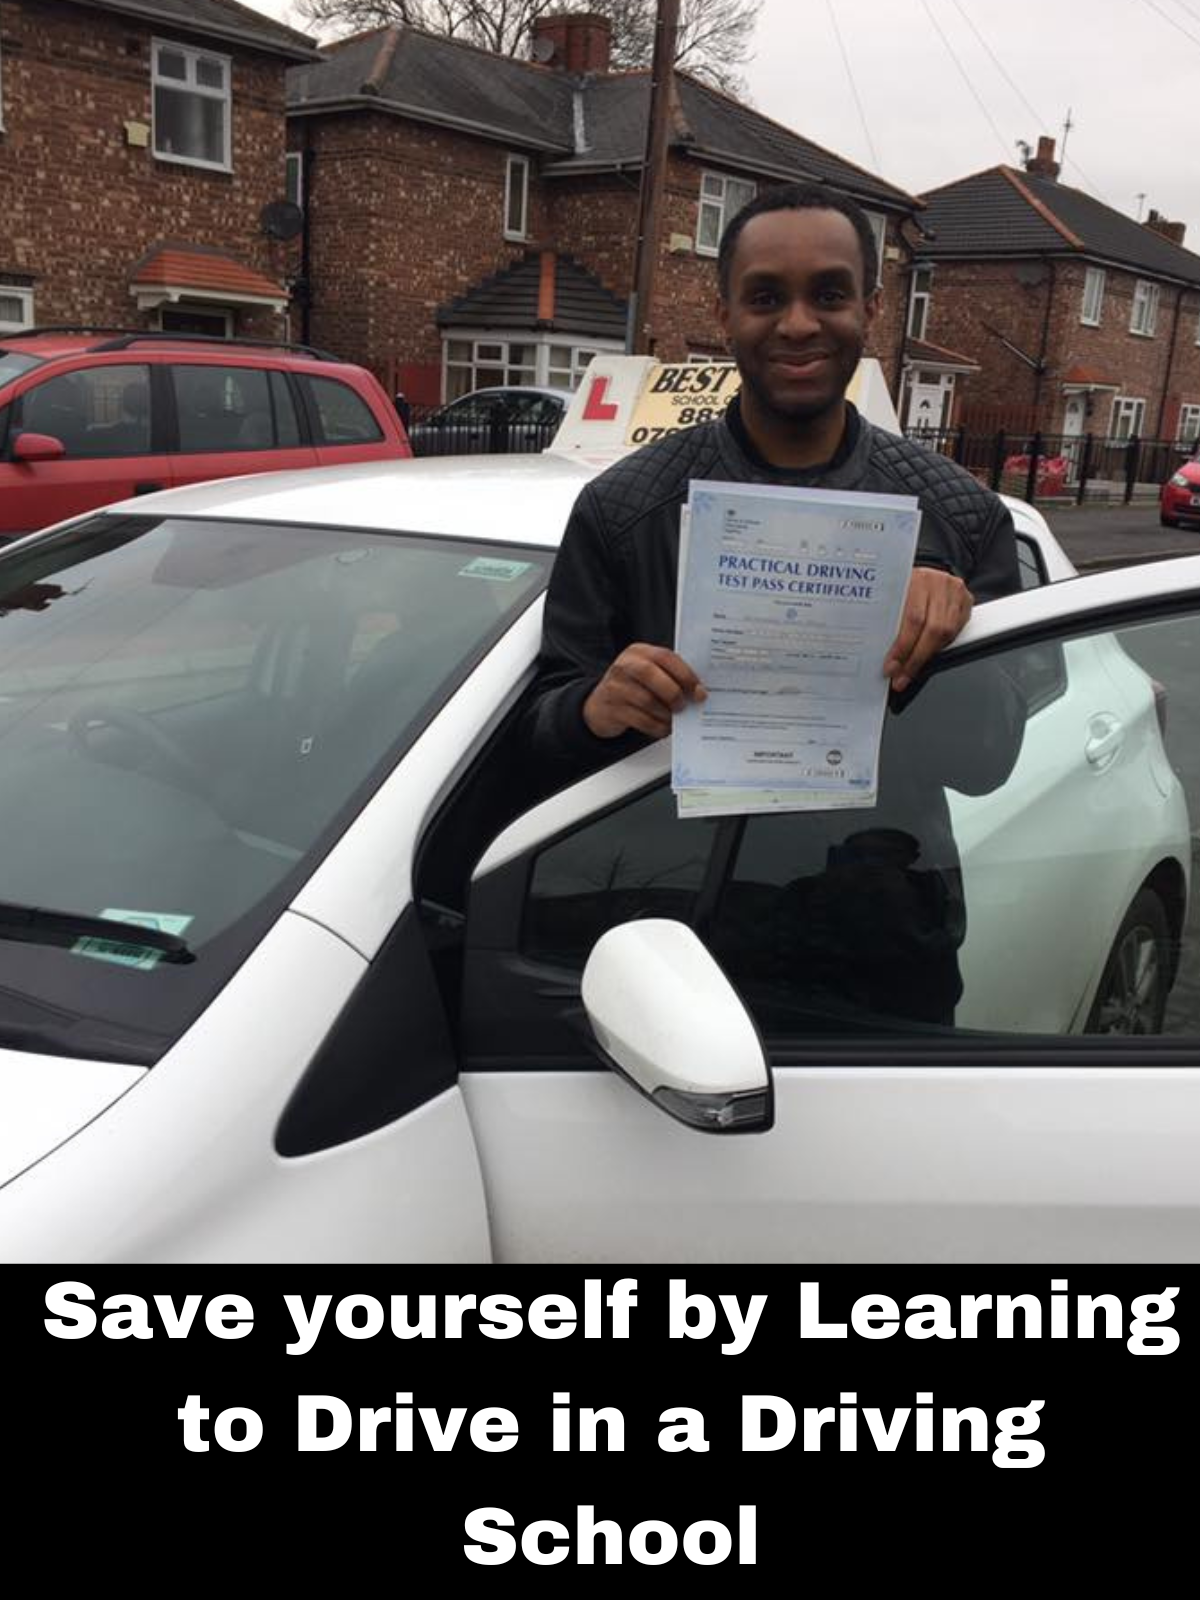 Save yourself by Learning to Drive in a Driving School